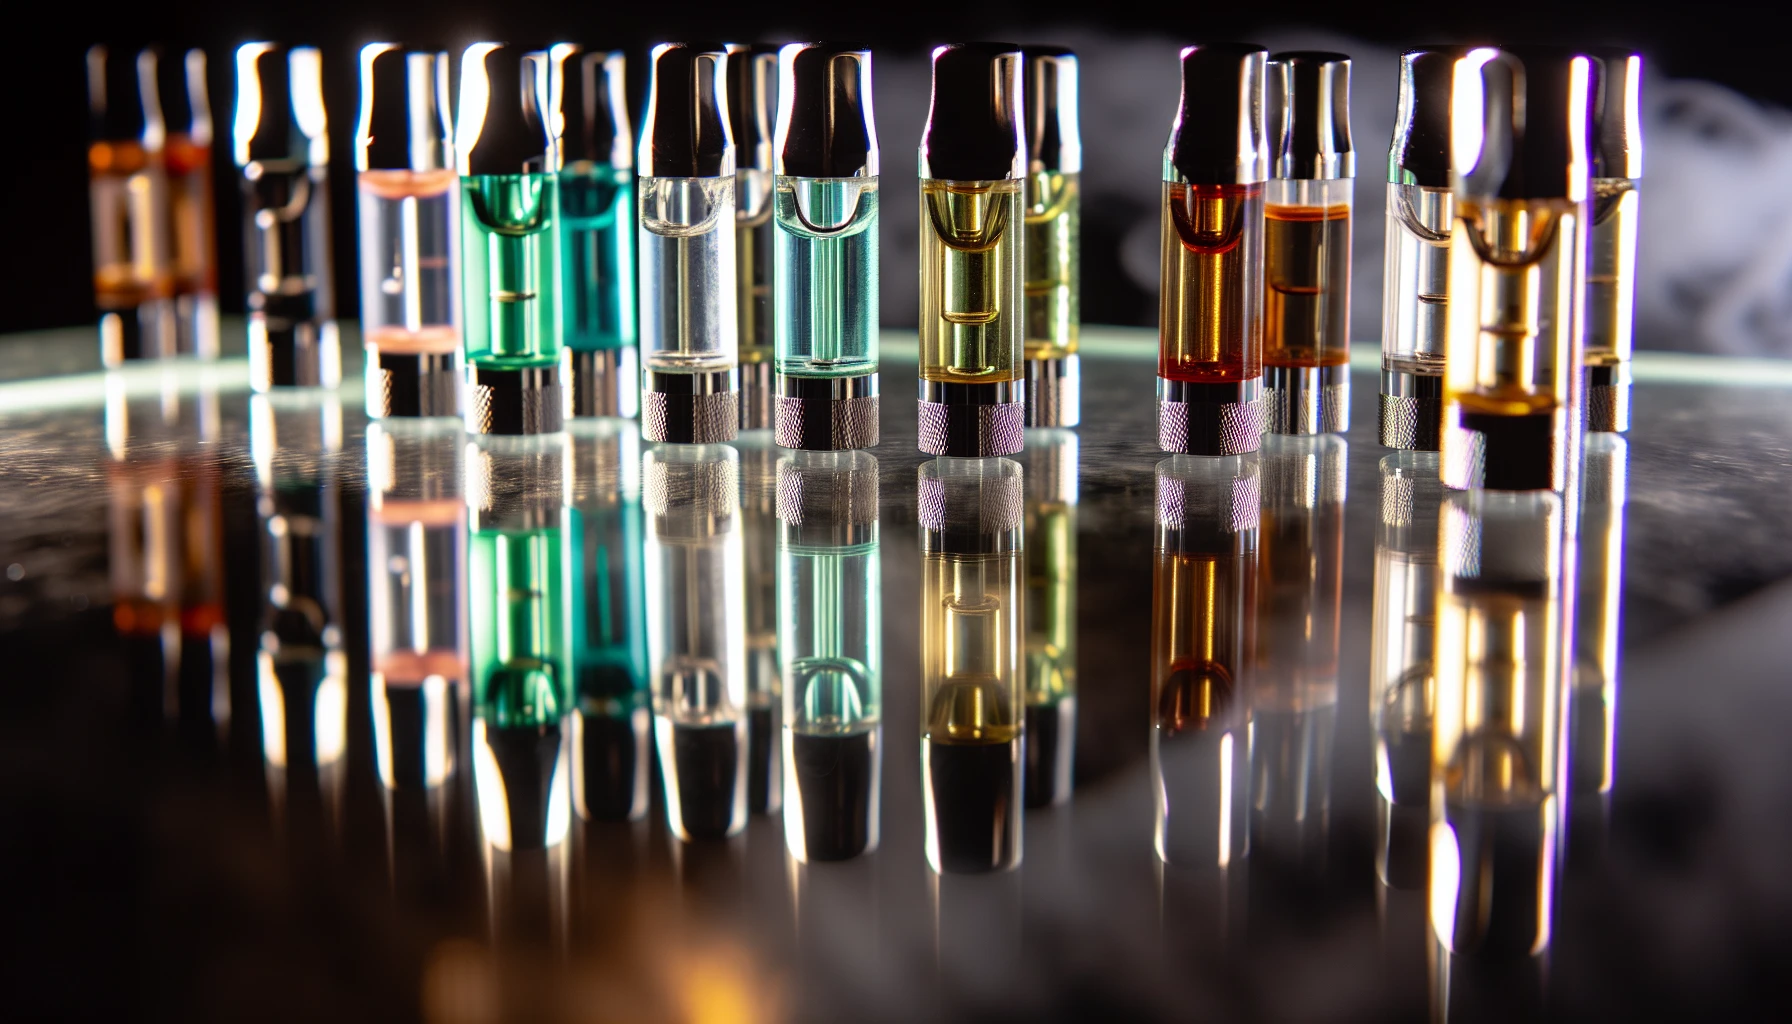 Vape cartridges with different flavors